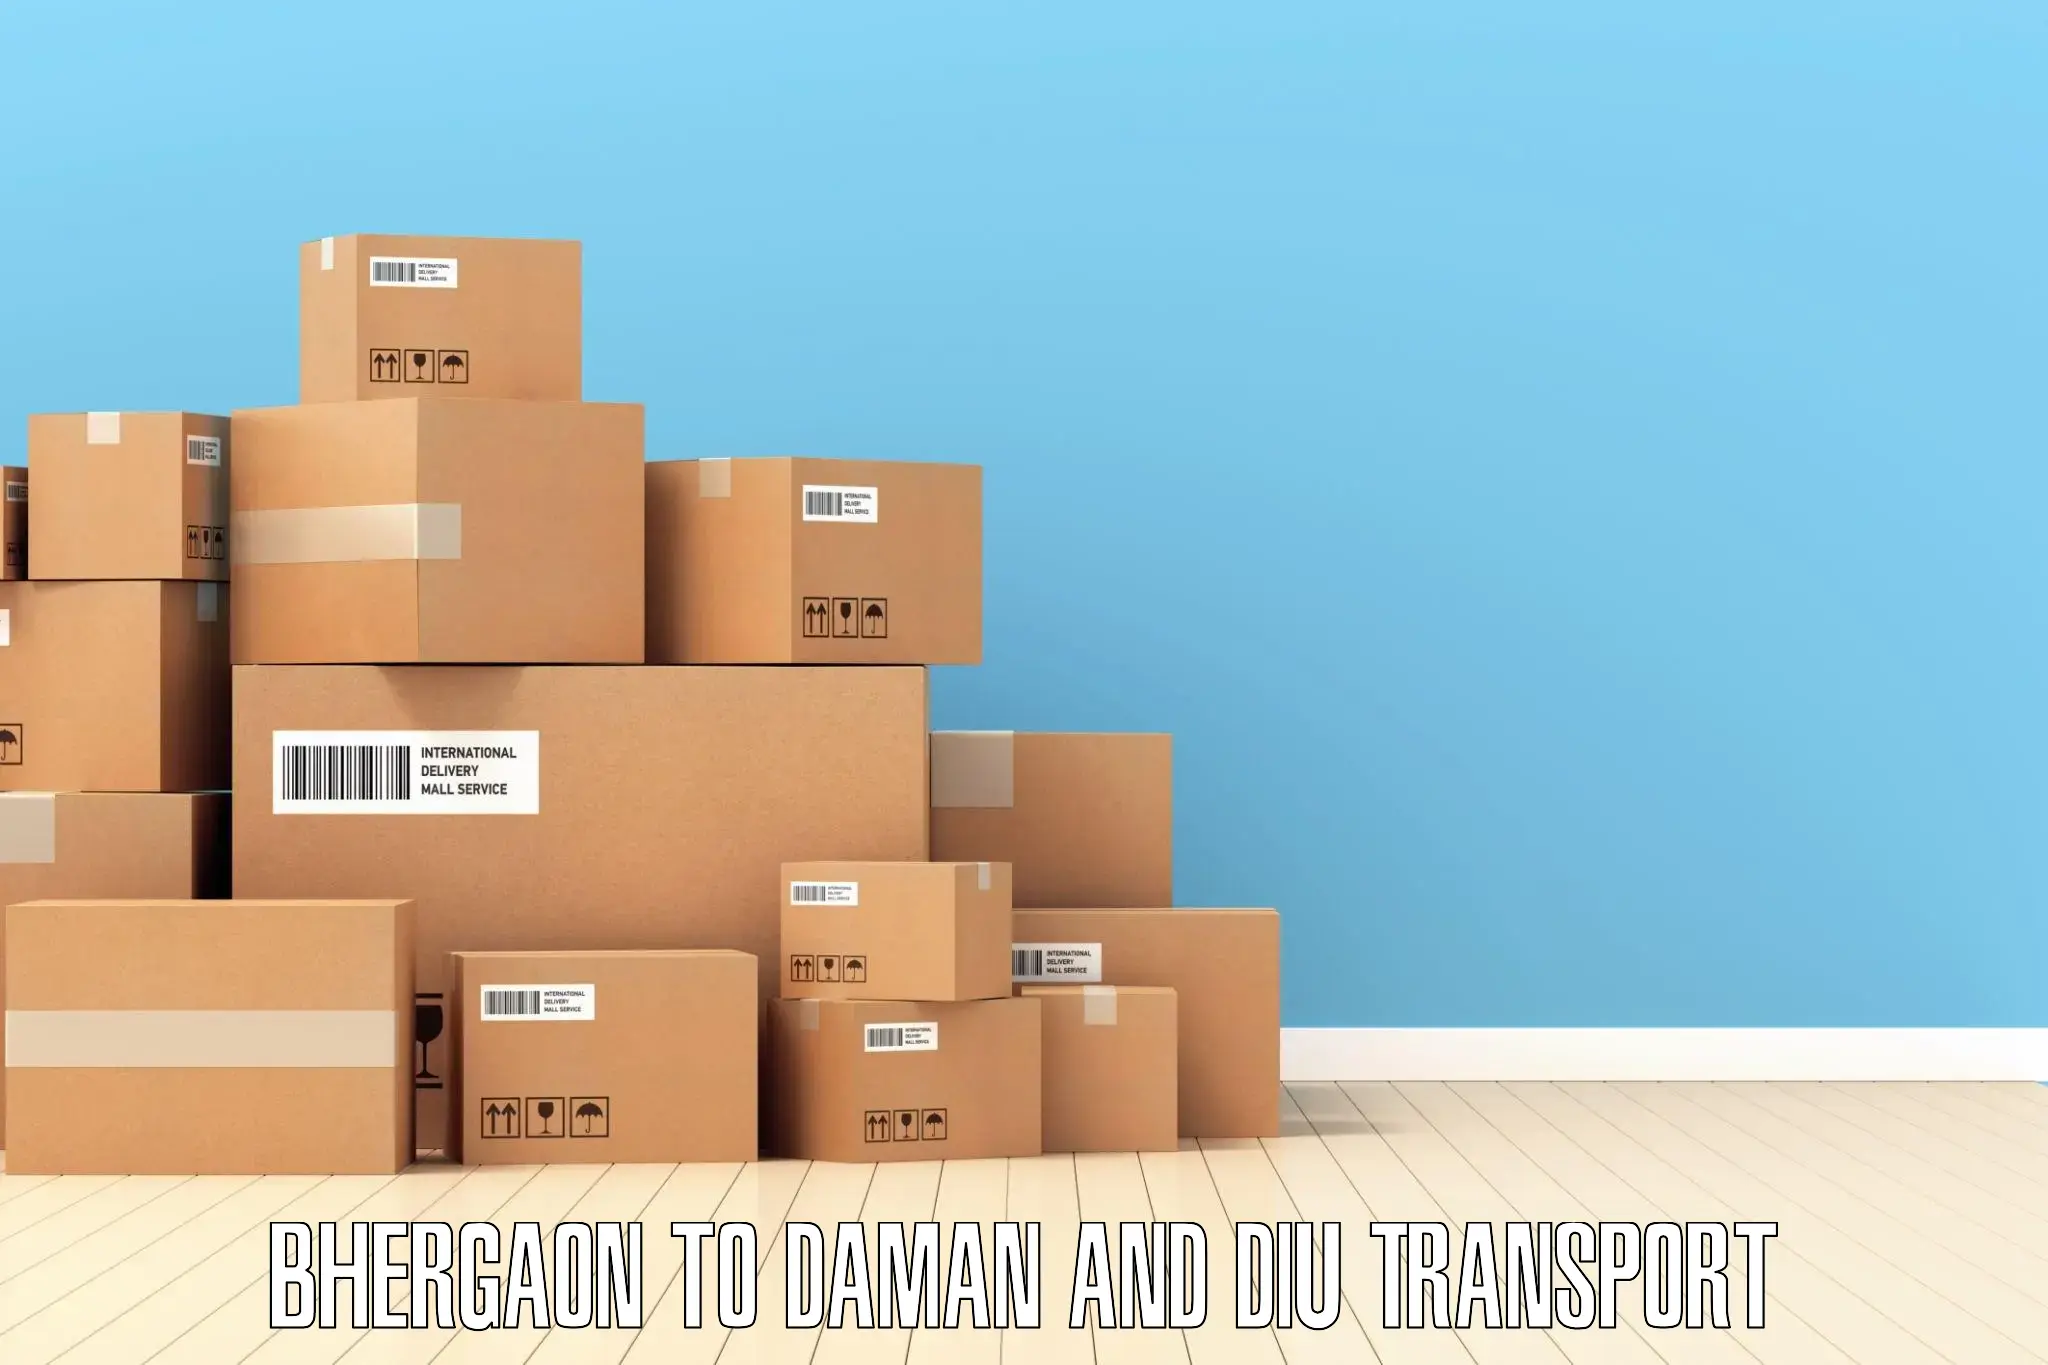 Transportation solution services Bhergaon to Daman and Diu